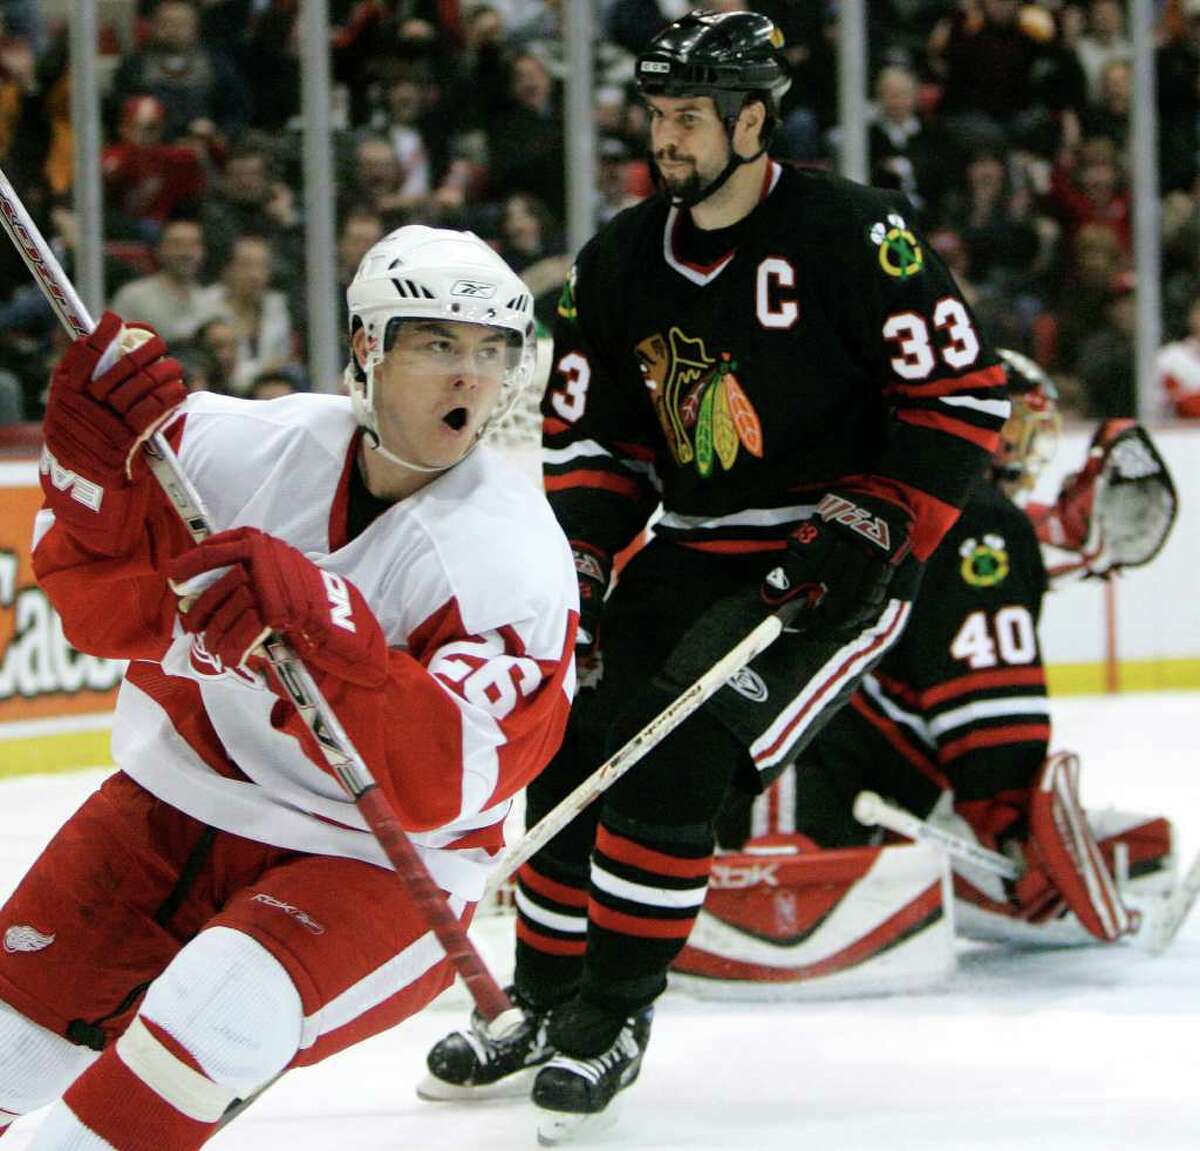 Detroit Red Wings Jiri Hudler , left, of the Czech Republic celebrates his second-period goal as Chicago Blackhawks defenseman Adrian Aucoin (33) skates by goalie Patrick Lalime in an NHL hockey game in Detroit, Friday, March 2, 2007. (AP Photo/Paul Sancya)